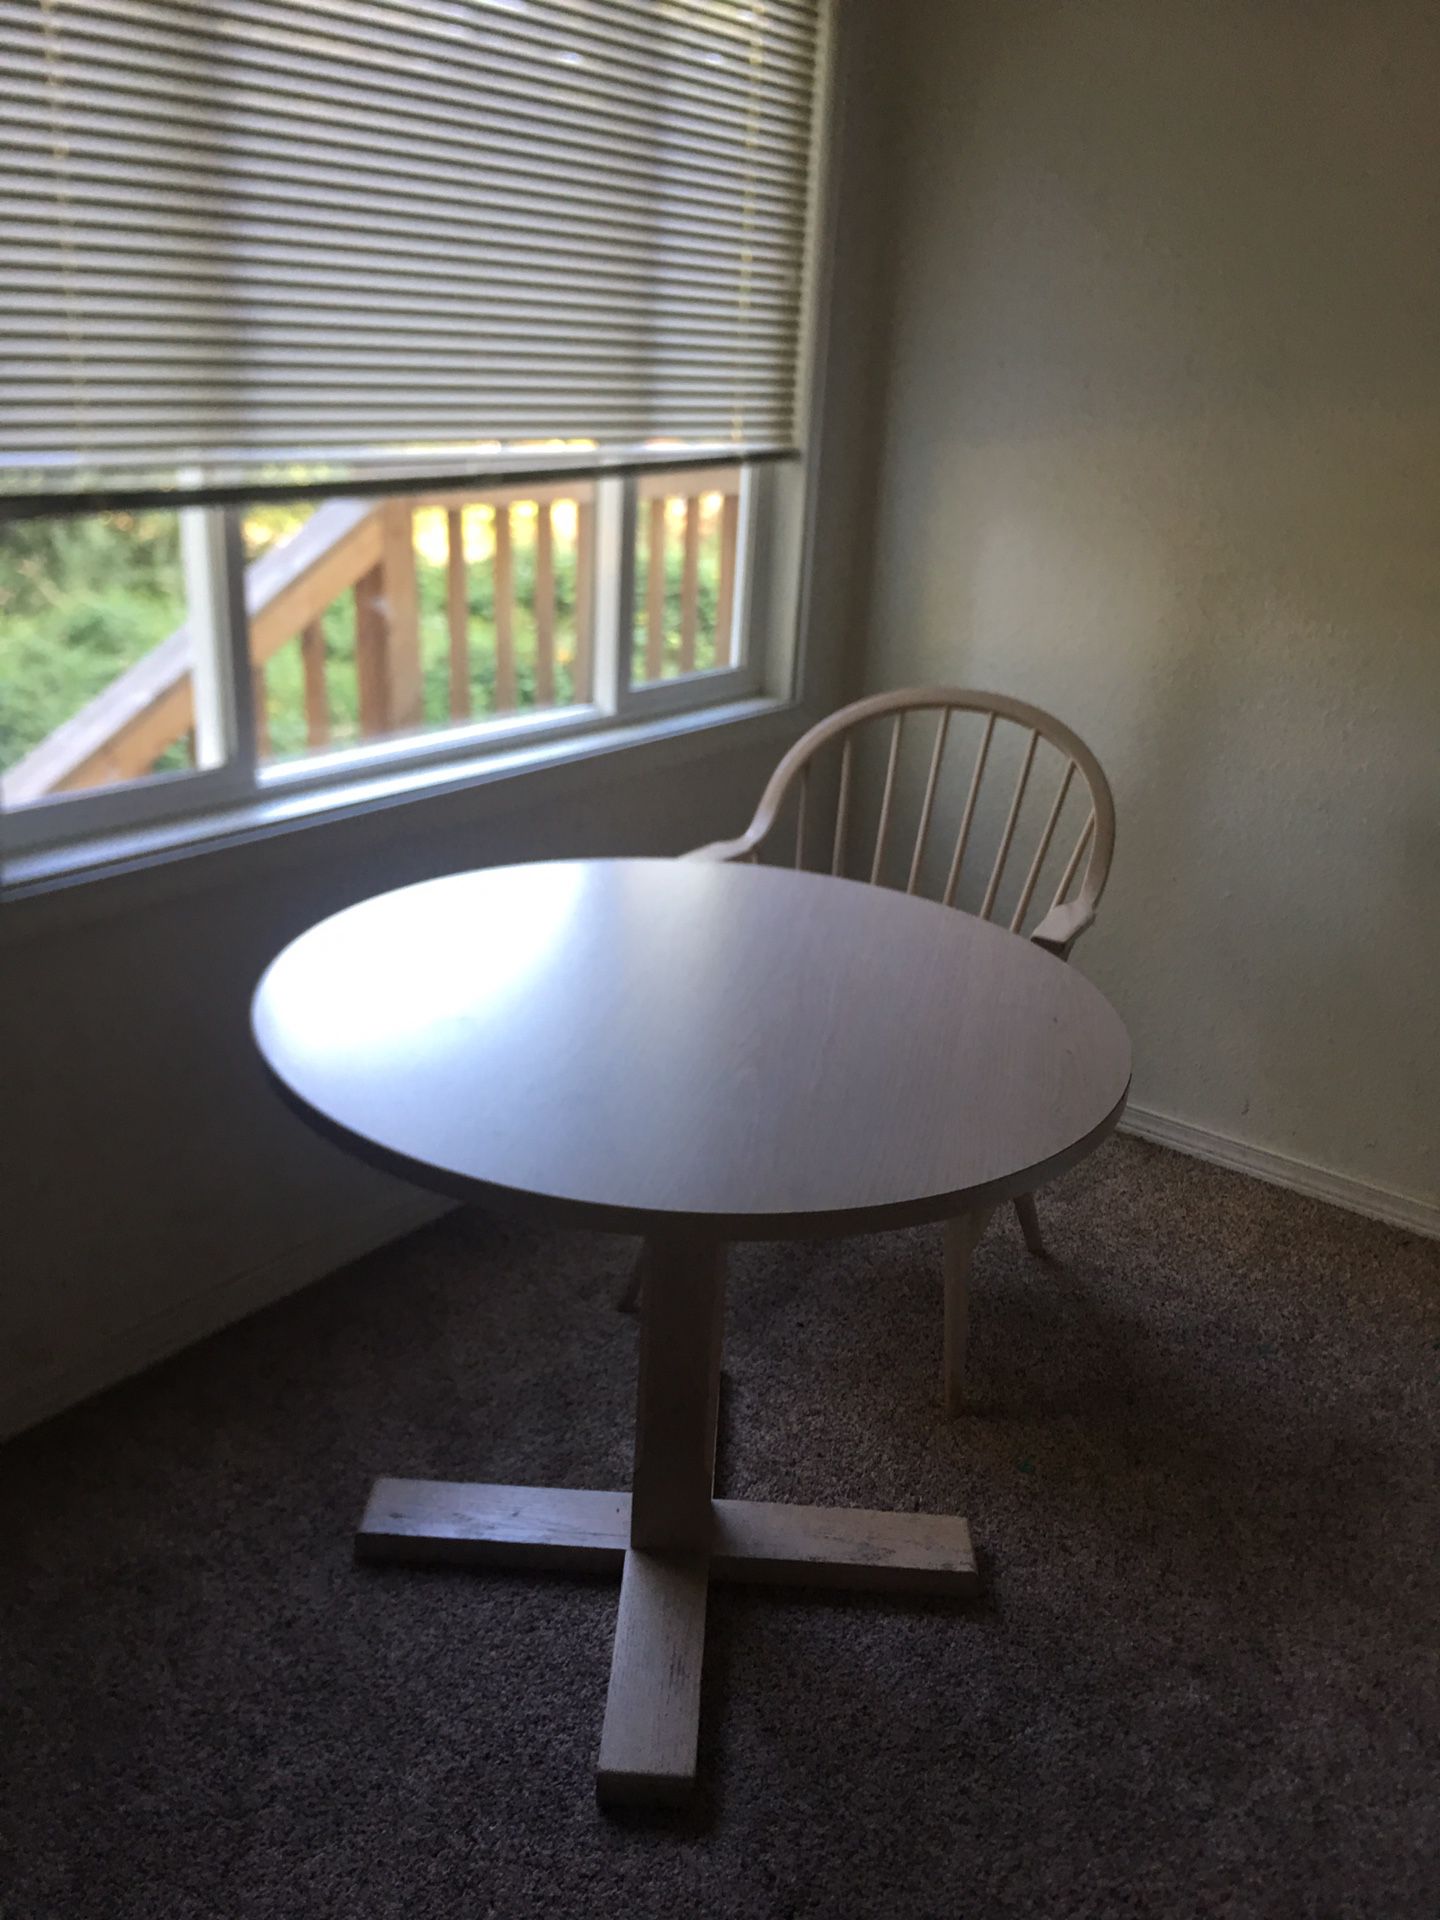 Cute Small Wooden Kitchen Table w/ 4 Chairs